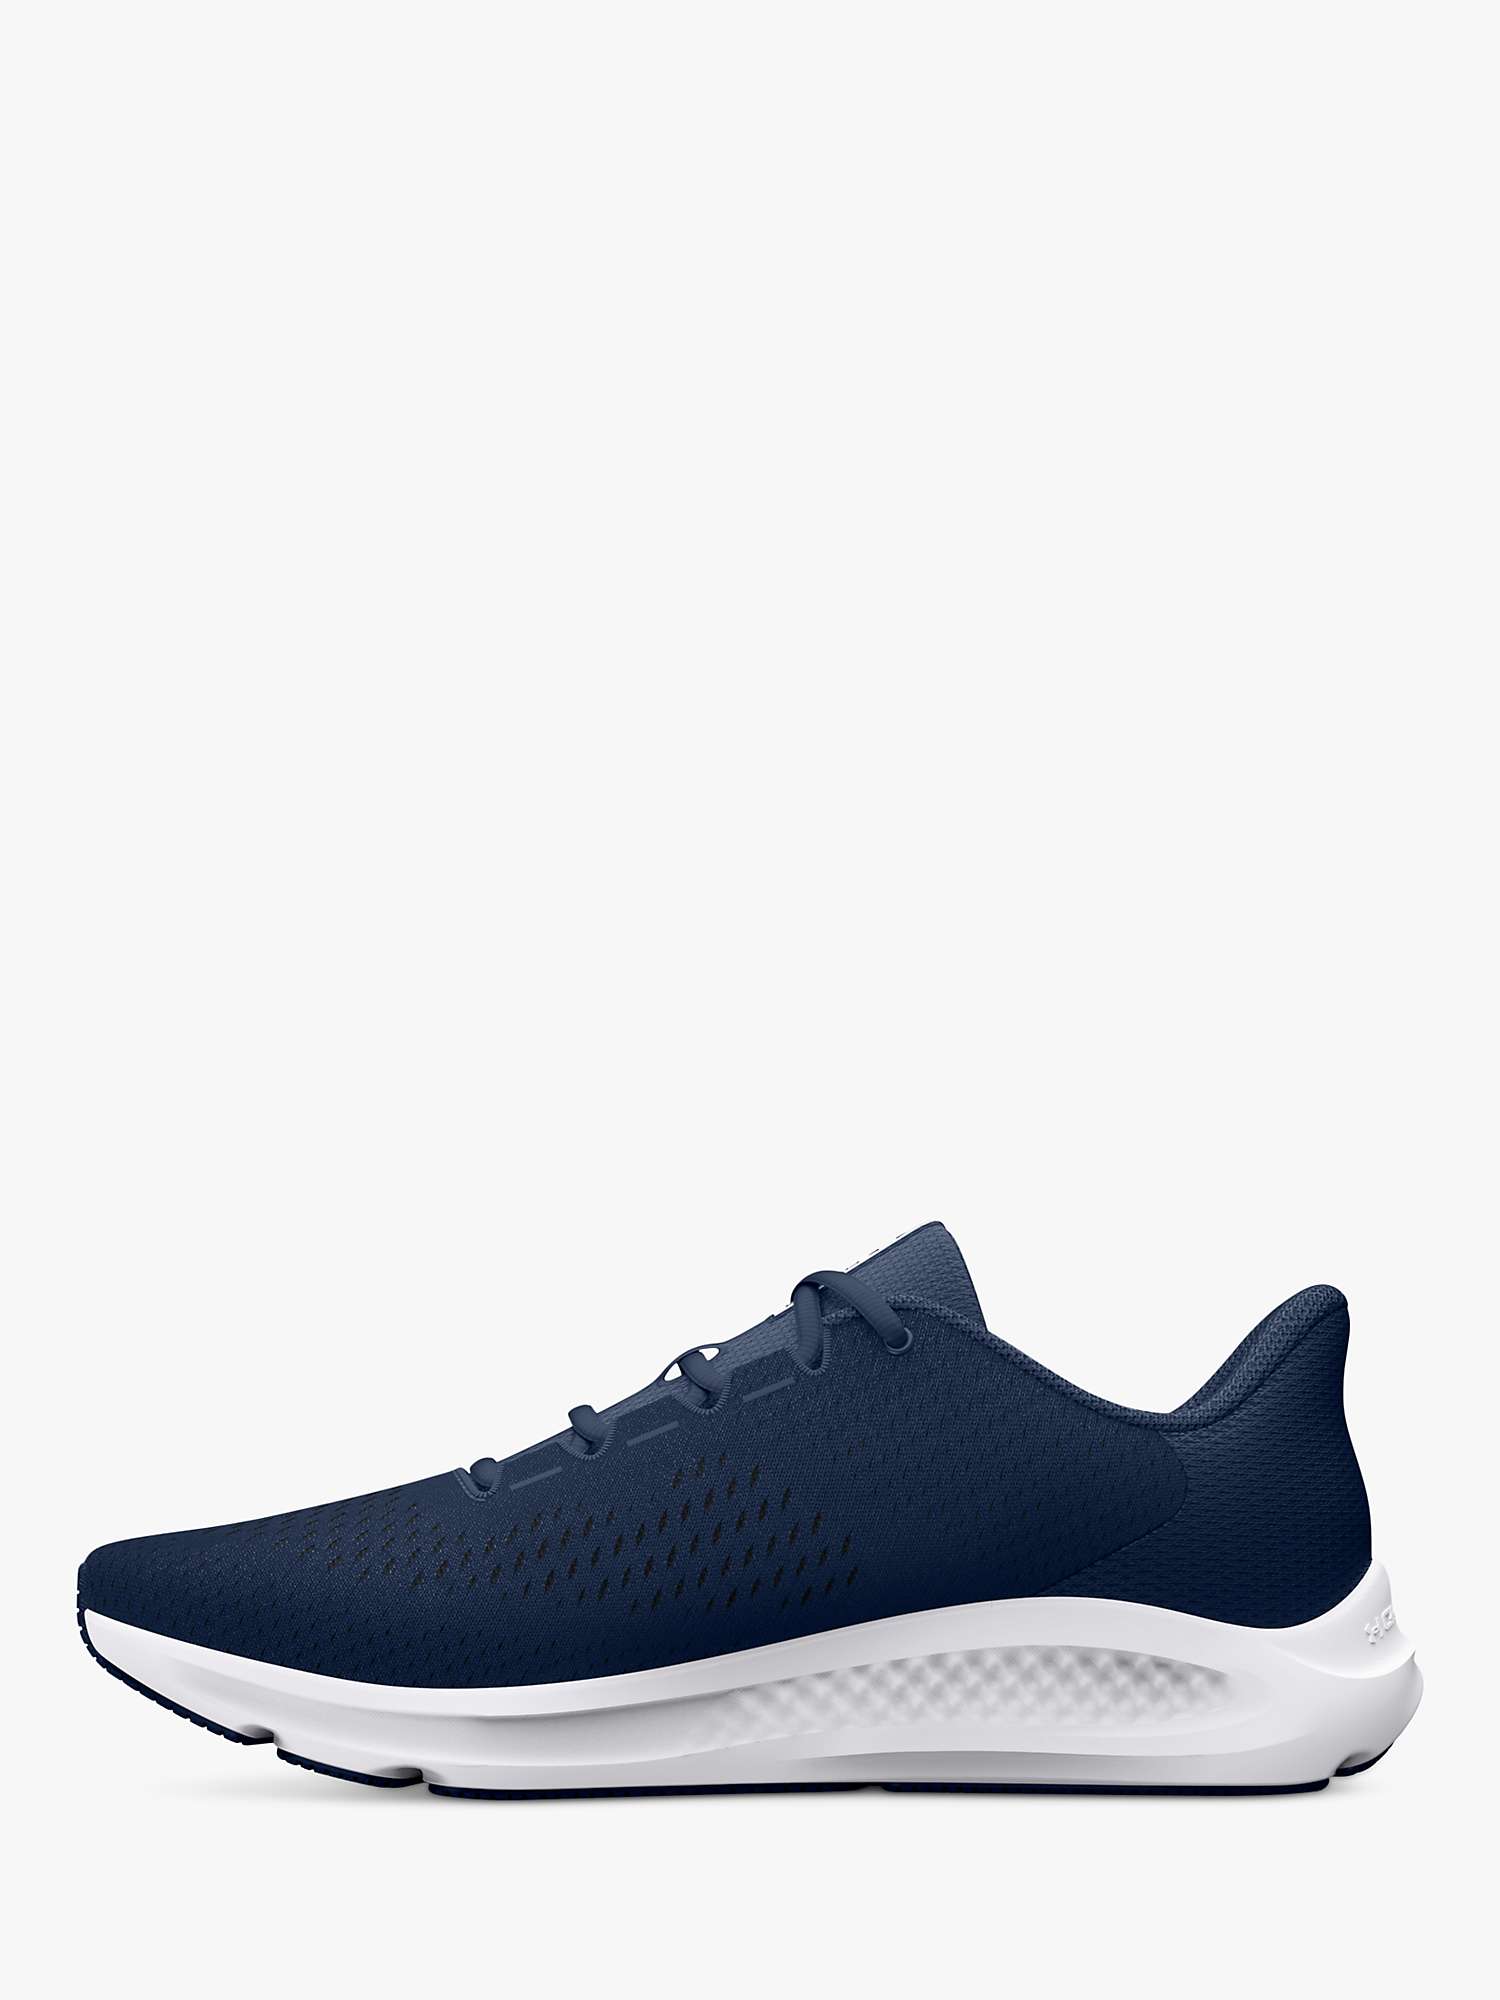 Under Armour Charged Pursuit 3 Big Logo Men's Running Shoes at John ...